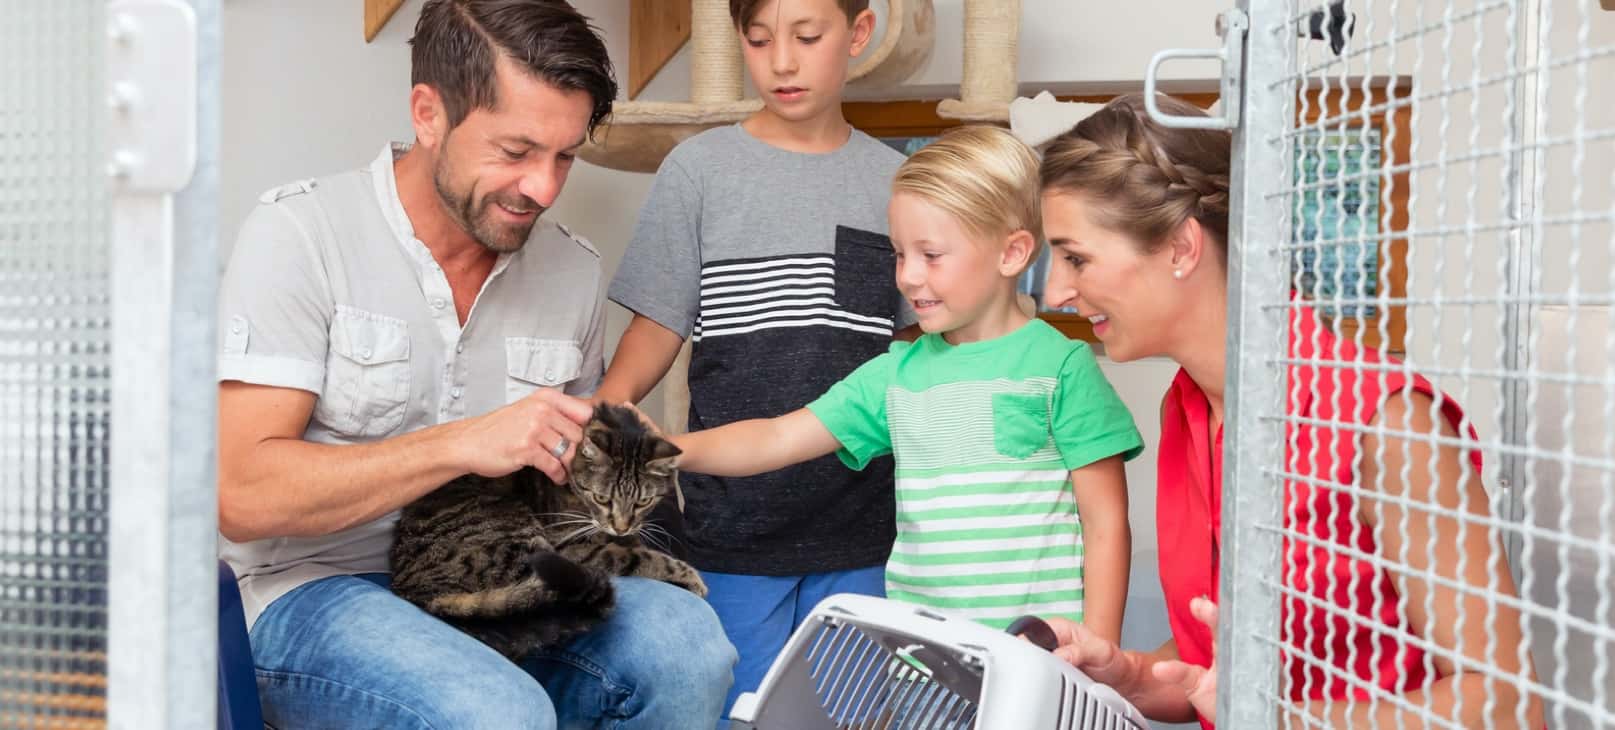 A family of four in an animal shelter. The father is holding a cat while the two sons pet it.